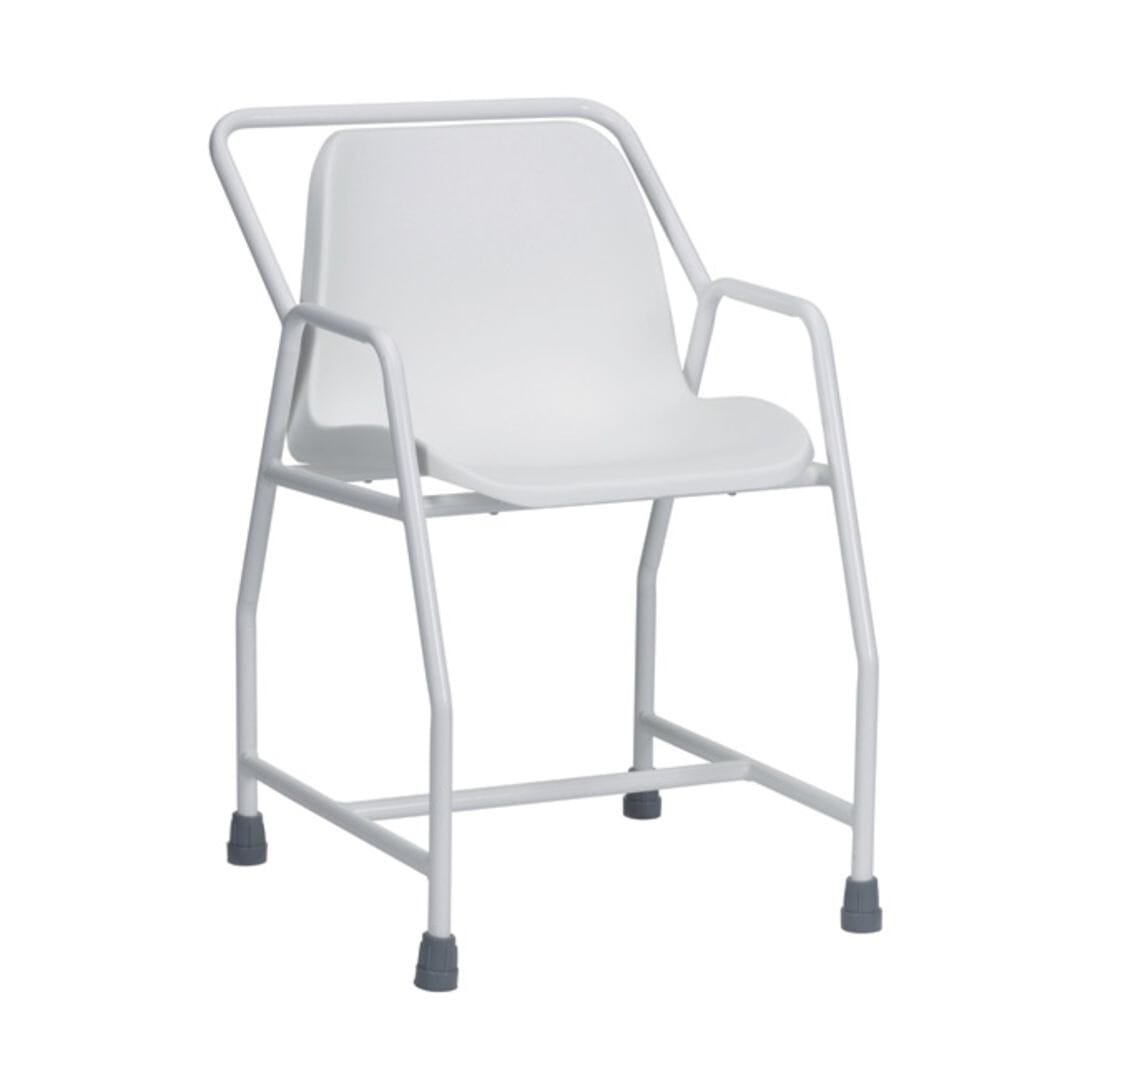 View Foxton Stationary Shower Chair Fixed Height information